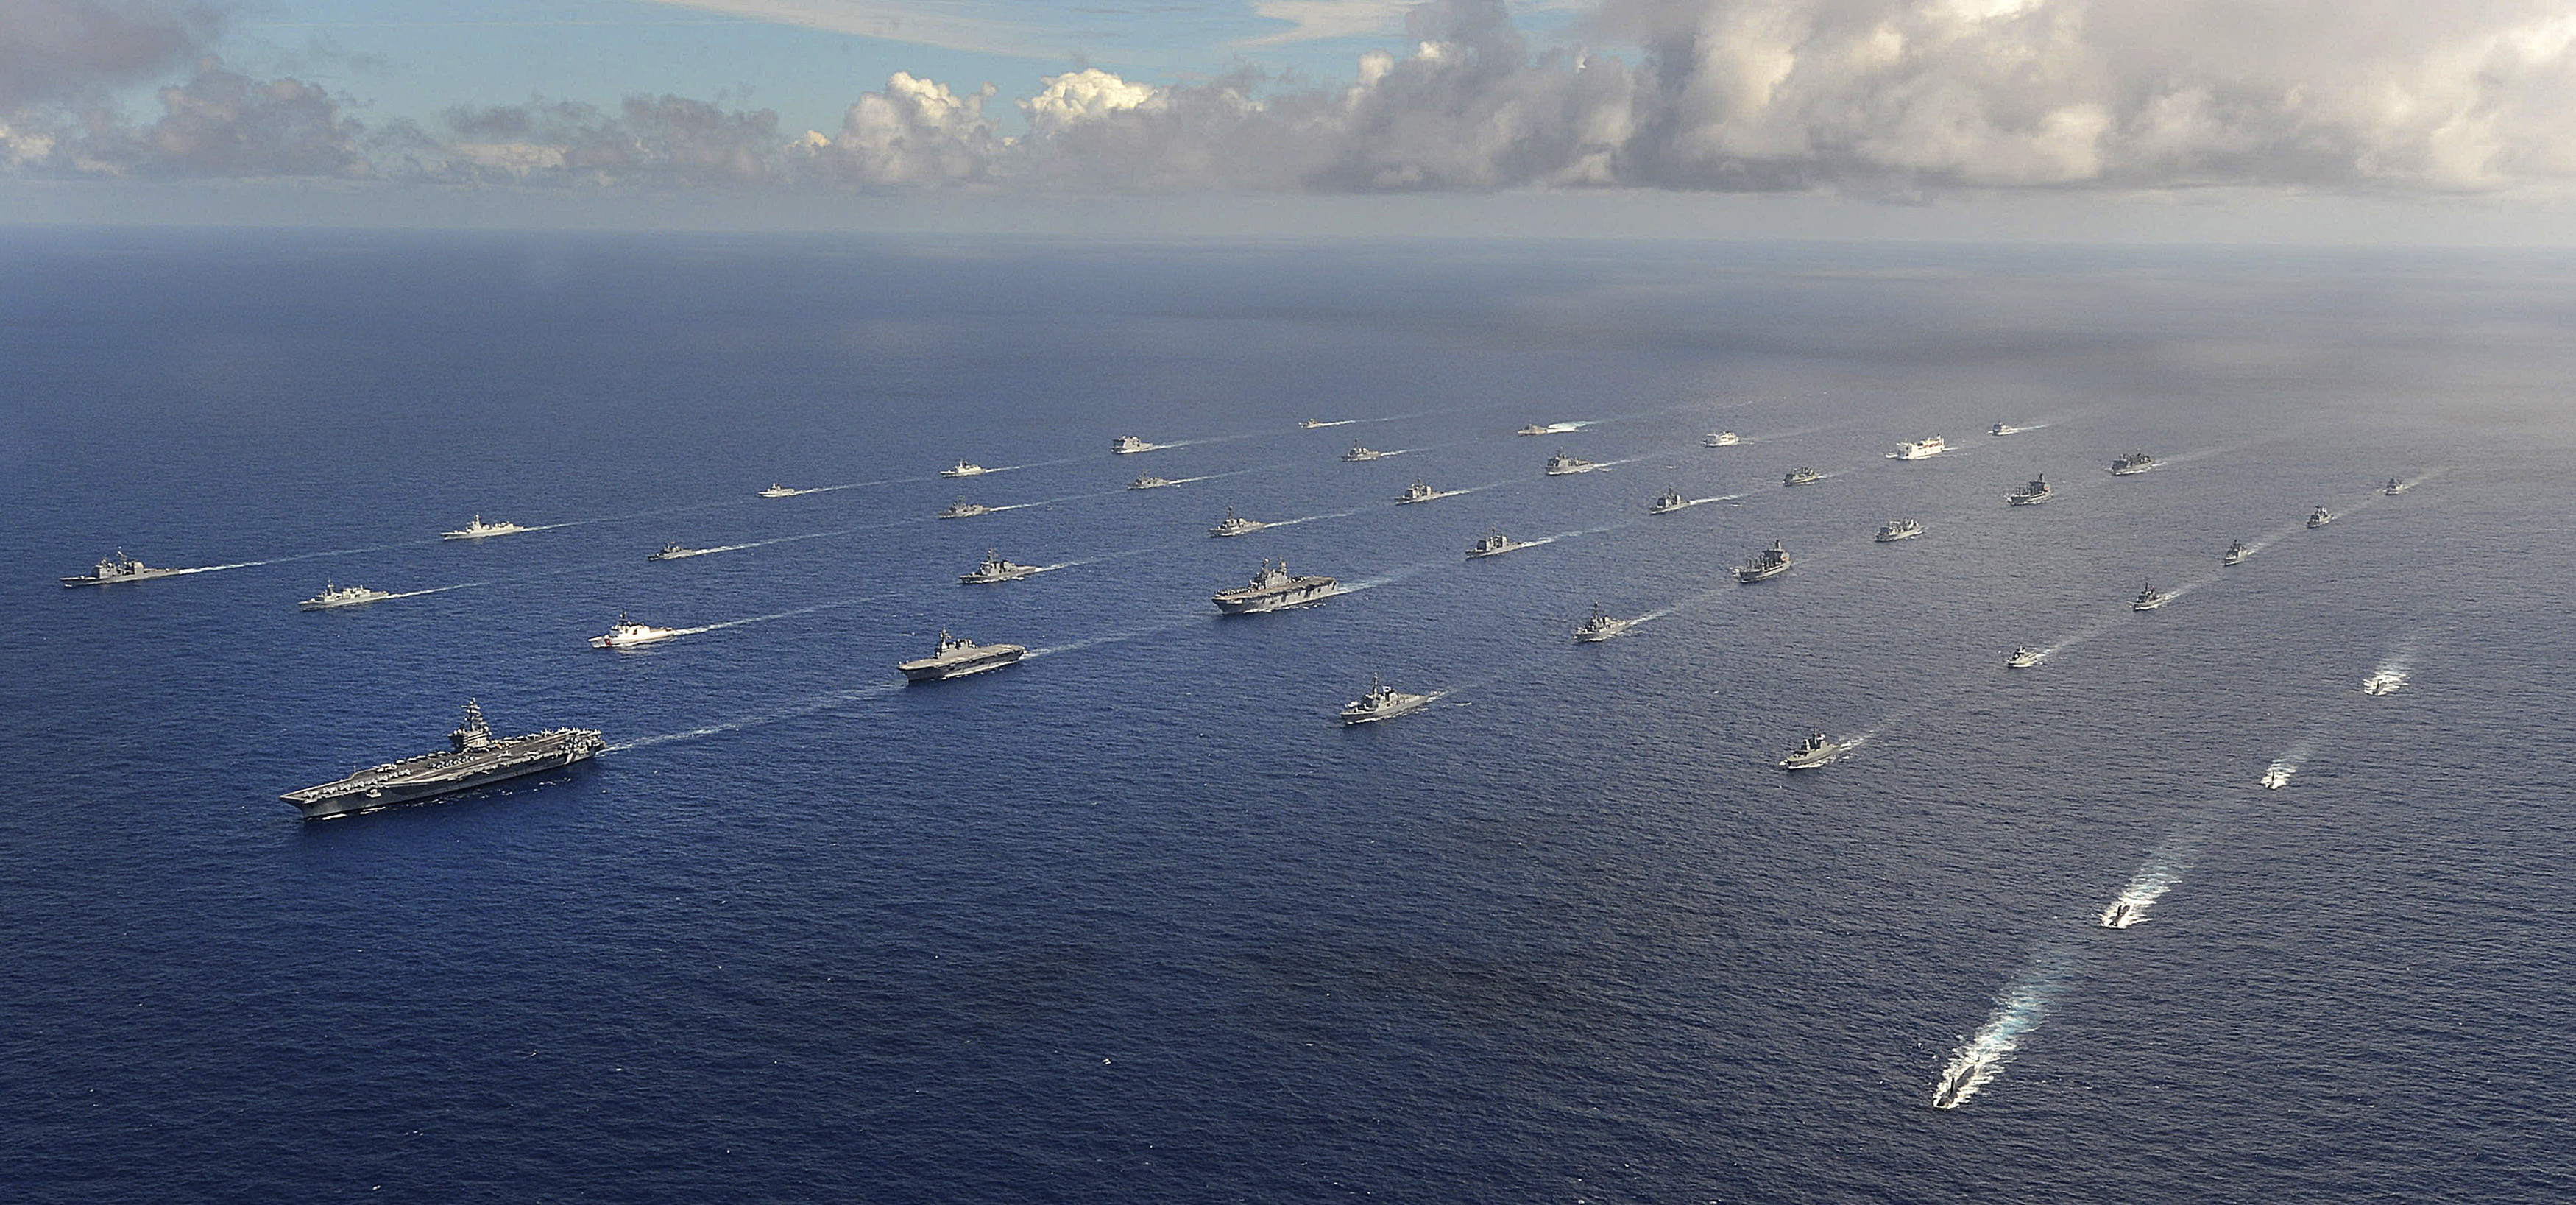 More than 40 ships and submarines representing 15 international partner nations travel in formation in the Pacific Ocean during the Rim of the Pacific (RIMPAC) 2014 exercise in this U.S. Navy photo taken July 25, 2014, and released July 31, 2014.  RIMPAC is a U.S. Pacific Fleet-hosted biennial multinational maritime exercise.  REUTERS/U.S. Navy/Mass Communication Specialist 1st Class Shannon E. Renfroe/Handout  (UNITED STATES - Tags: MILITARY POLITICS) THIS IMAGE HAS BEEN SUPPLIED BY A THIRD PARTY. IT IS DISTRIBUTED, EXACTLY AS RECEIVED BY REUTERS, AS A SERVICE TO CLIENTS. FOR EDITORIAL USE ONLY. NOT FOR SALE FOR MARKETING OR ADVERTISING CAMPAIGNS - RTR40UA4